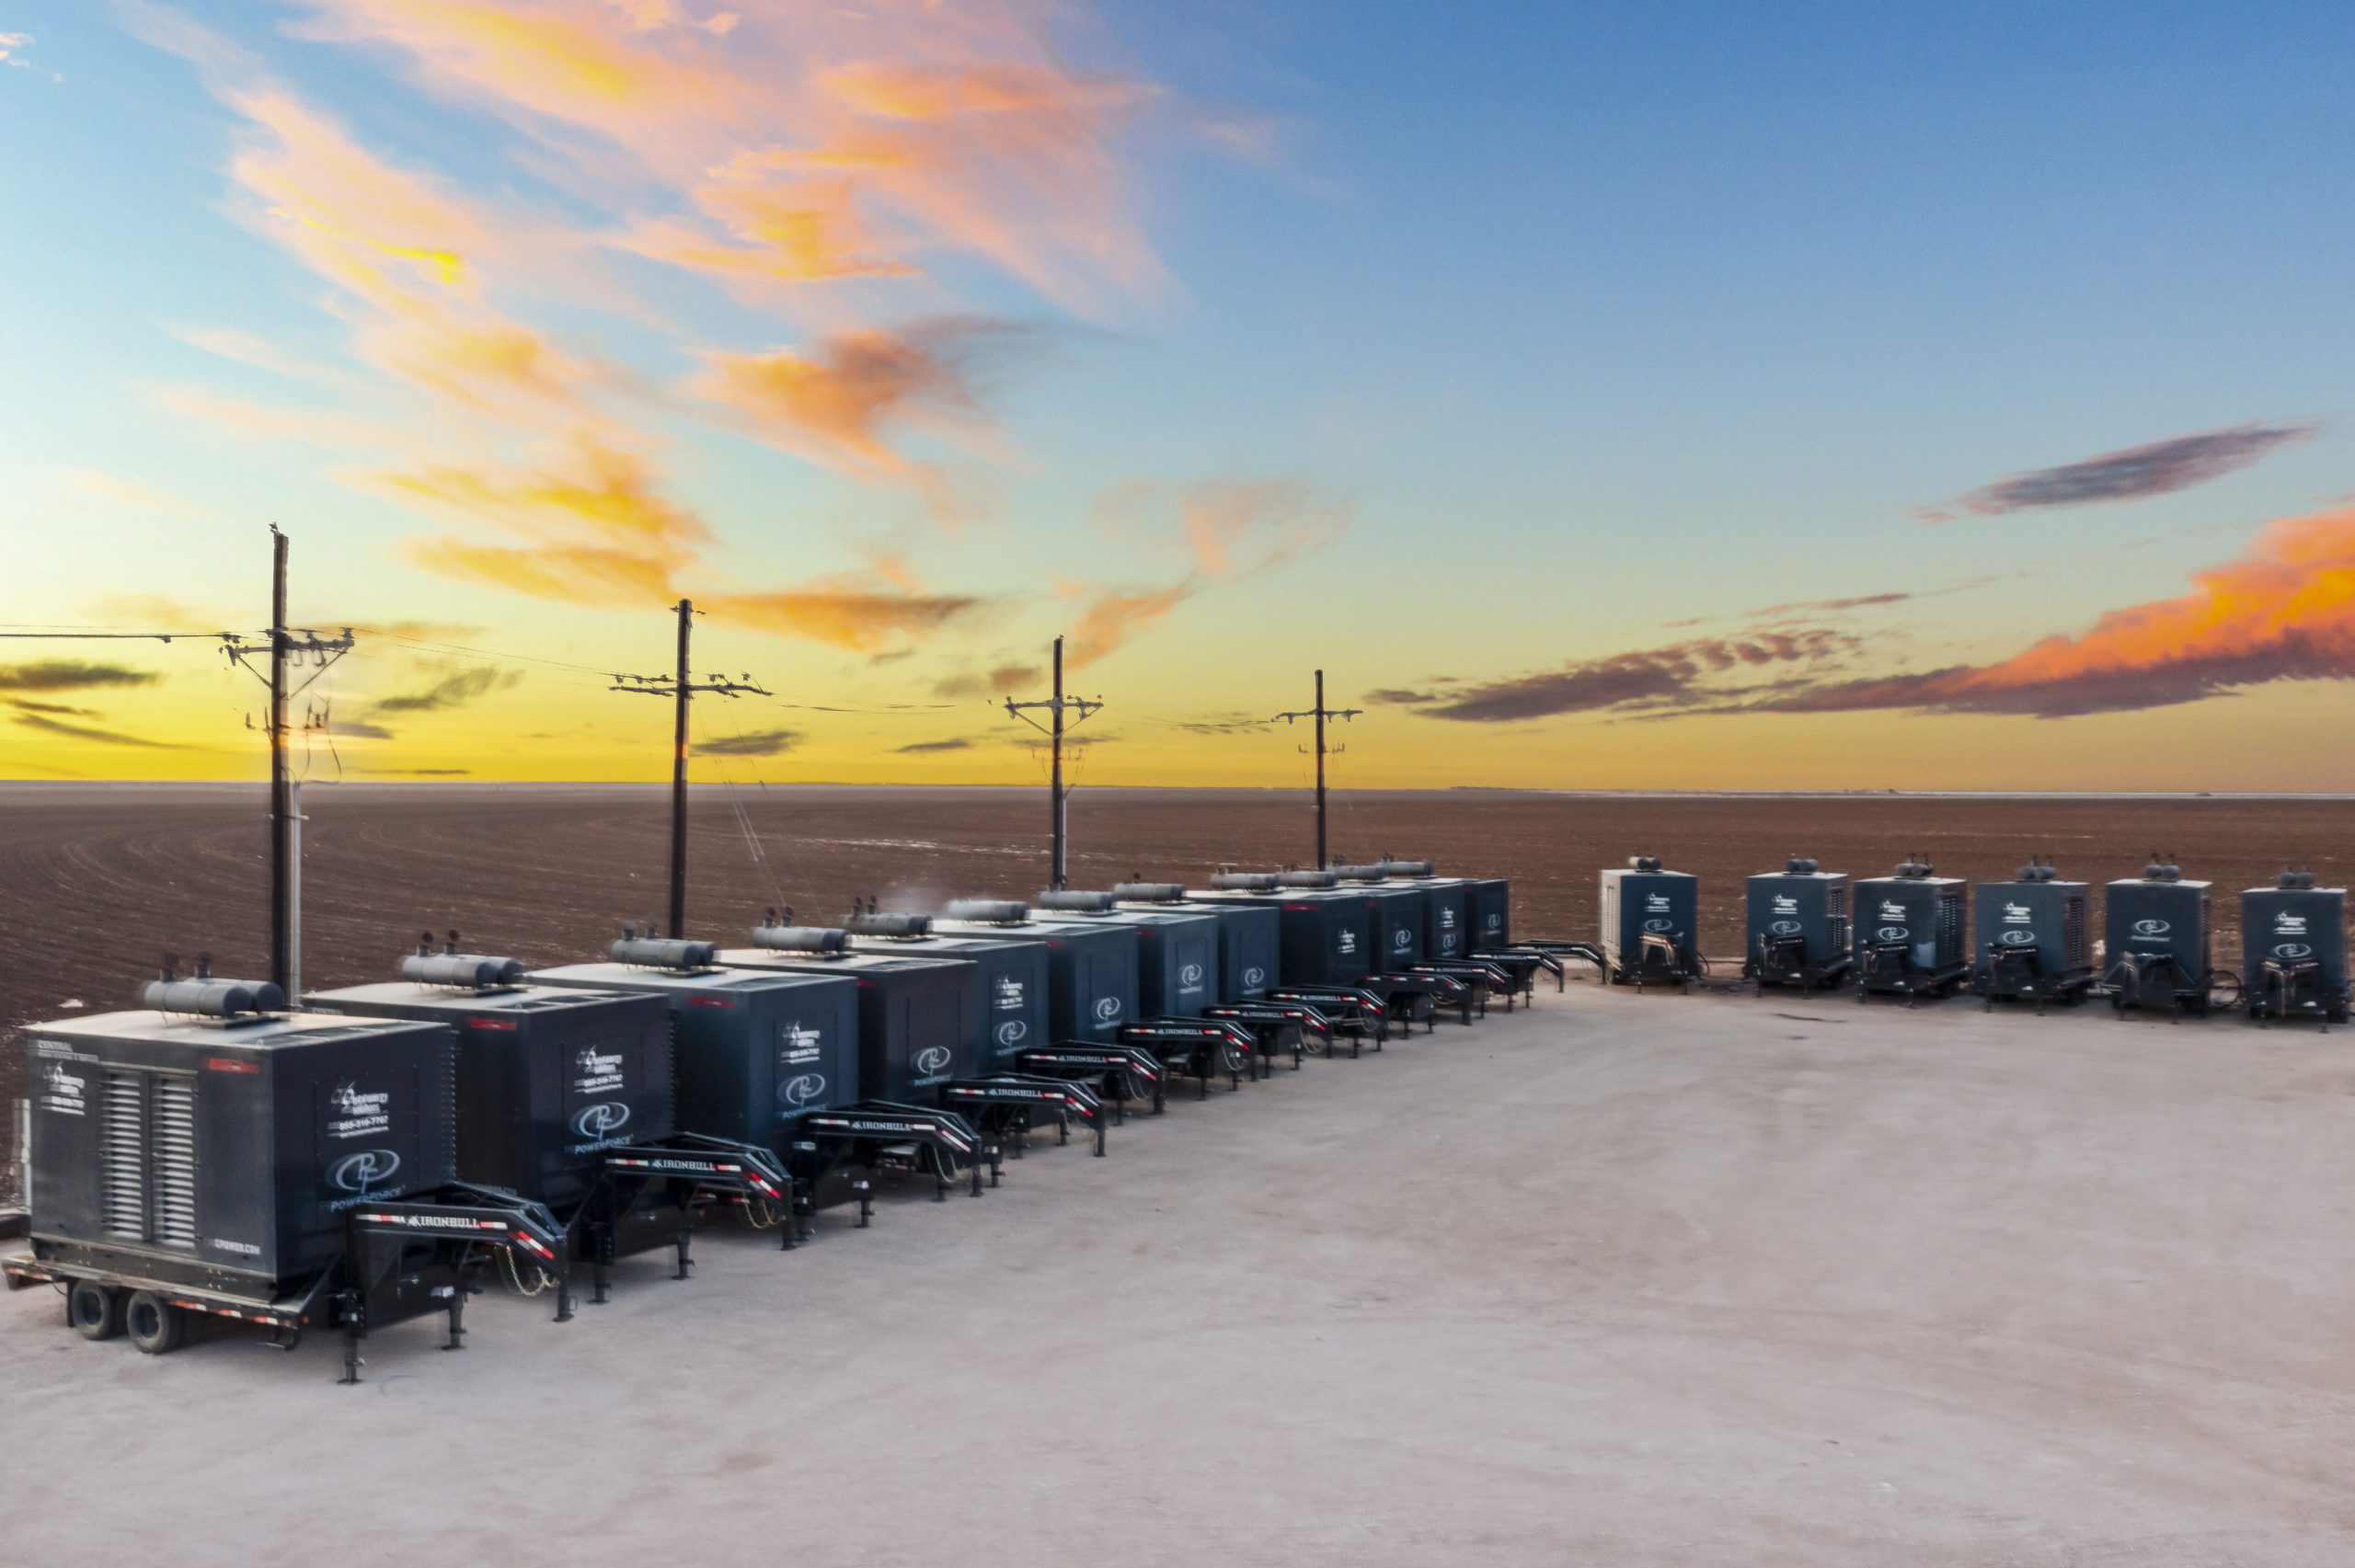 Trailer mounted natural gas generators for microgrid power plant